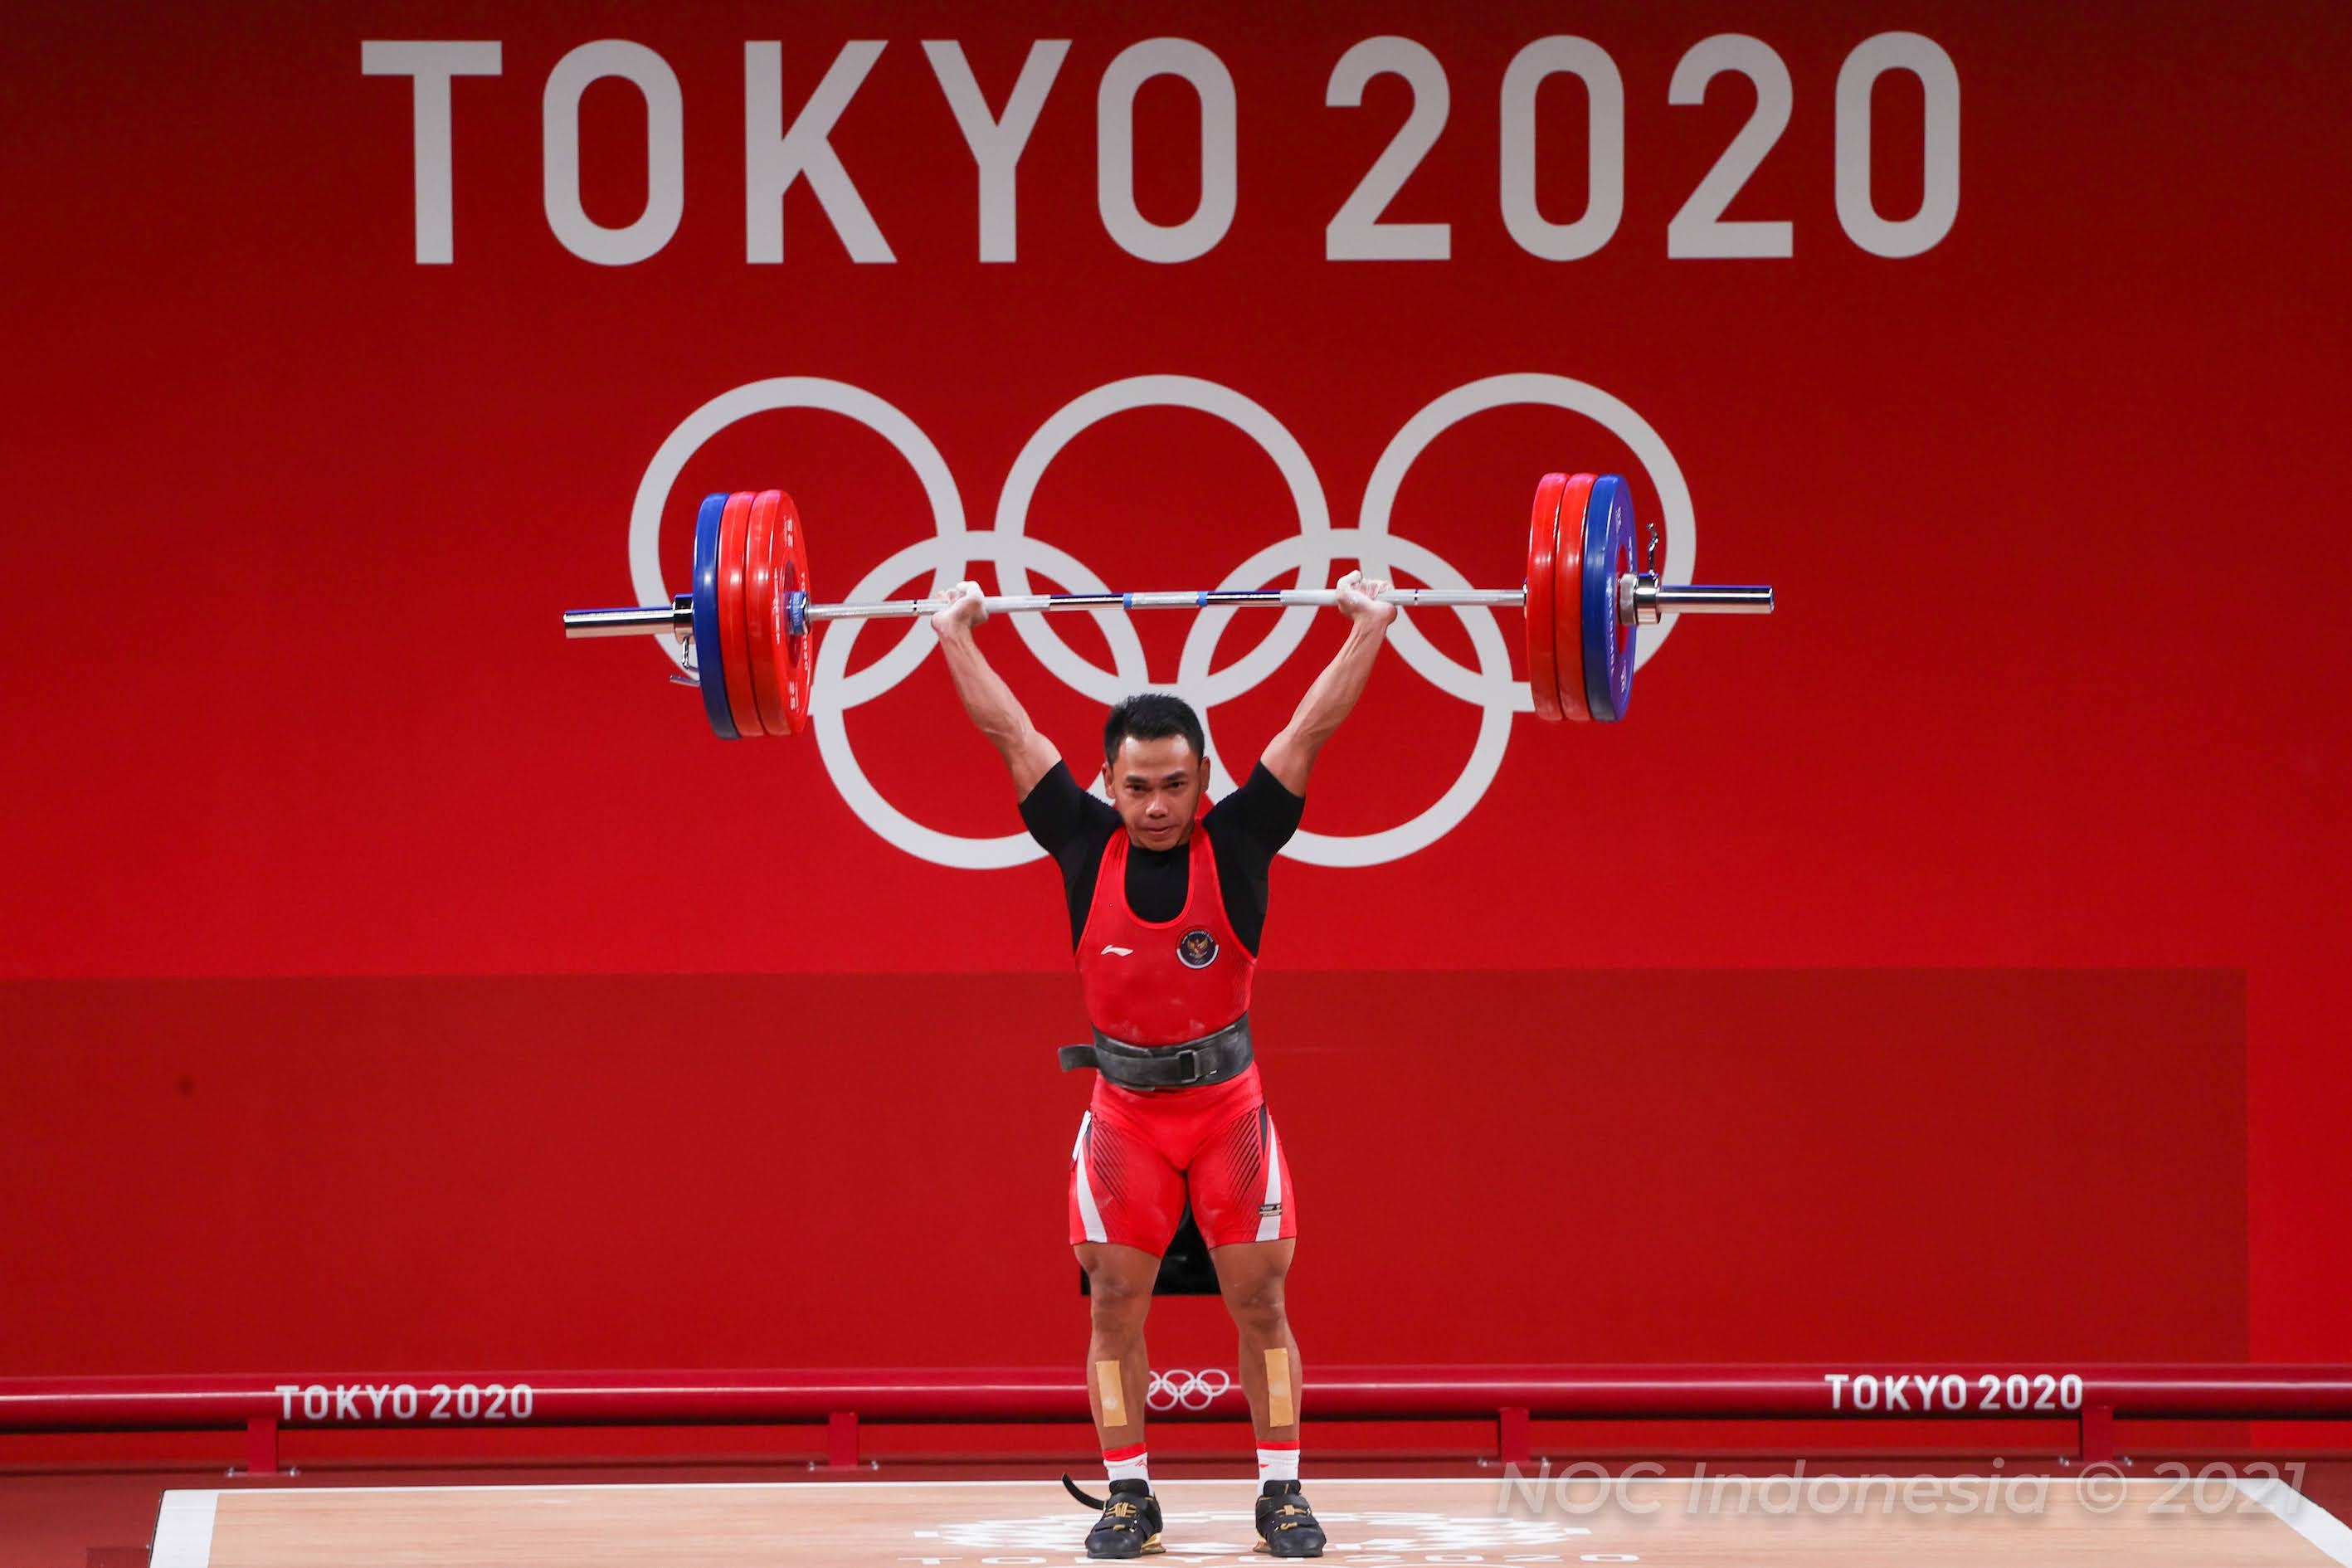 Eko Yuli Irawan Clinches Quintrick to Qualify for Olympics, Paris 2024 Marks Fifth Appearance - Indonesia Olympic Commitee